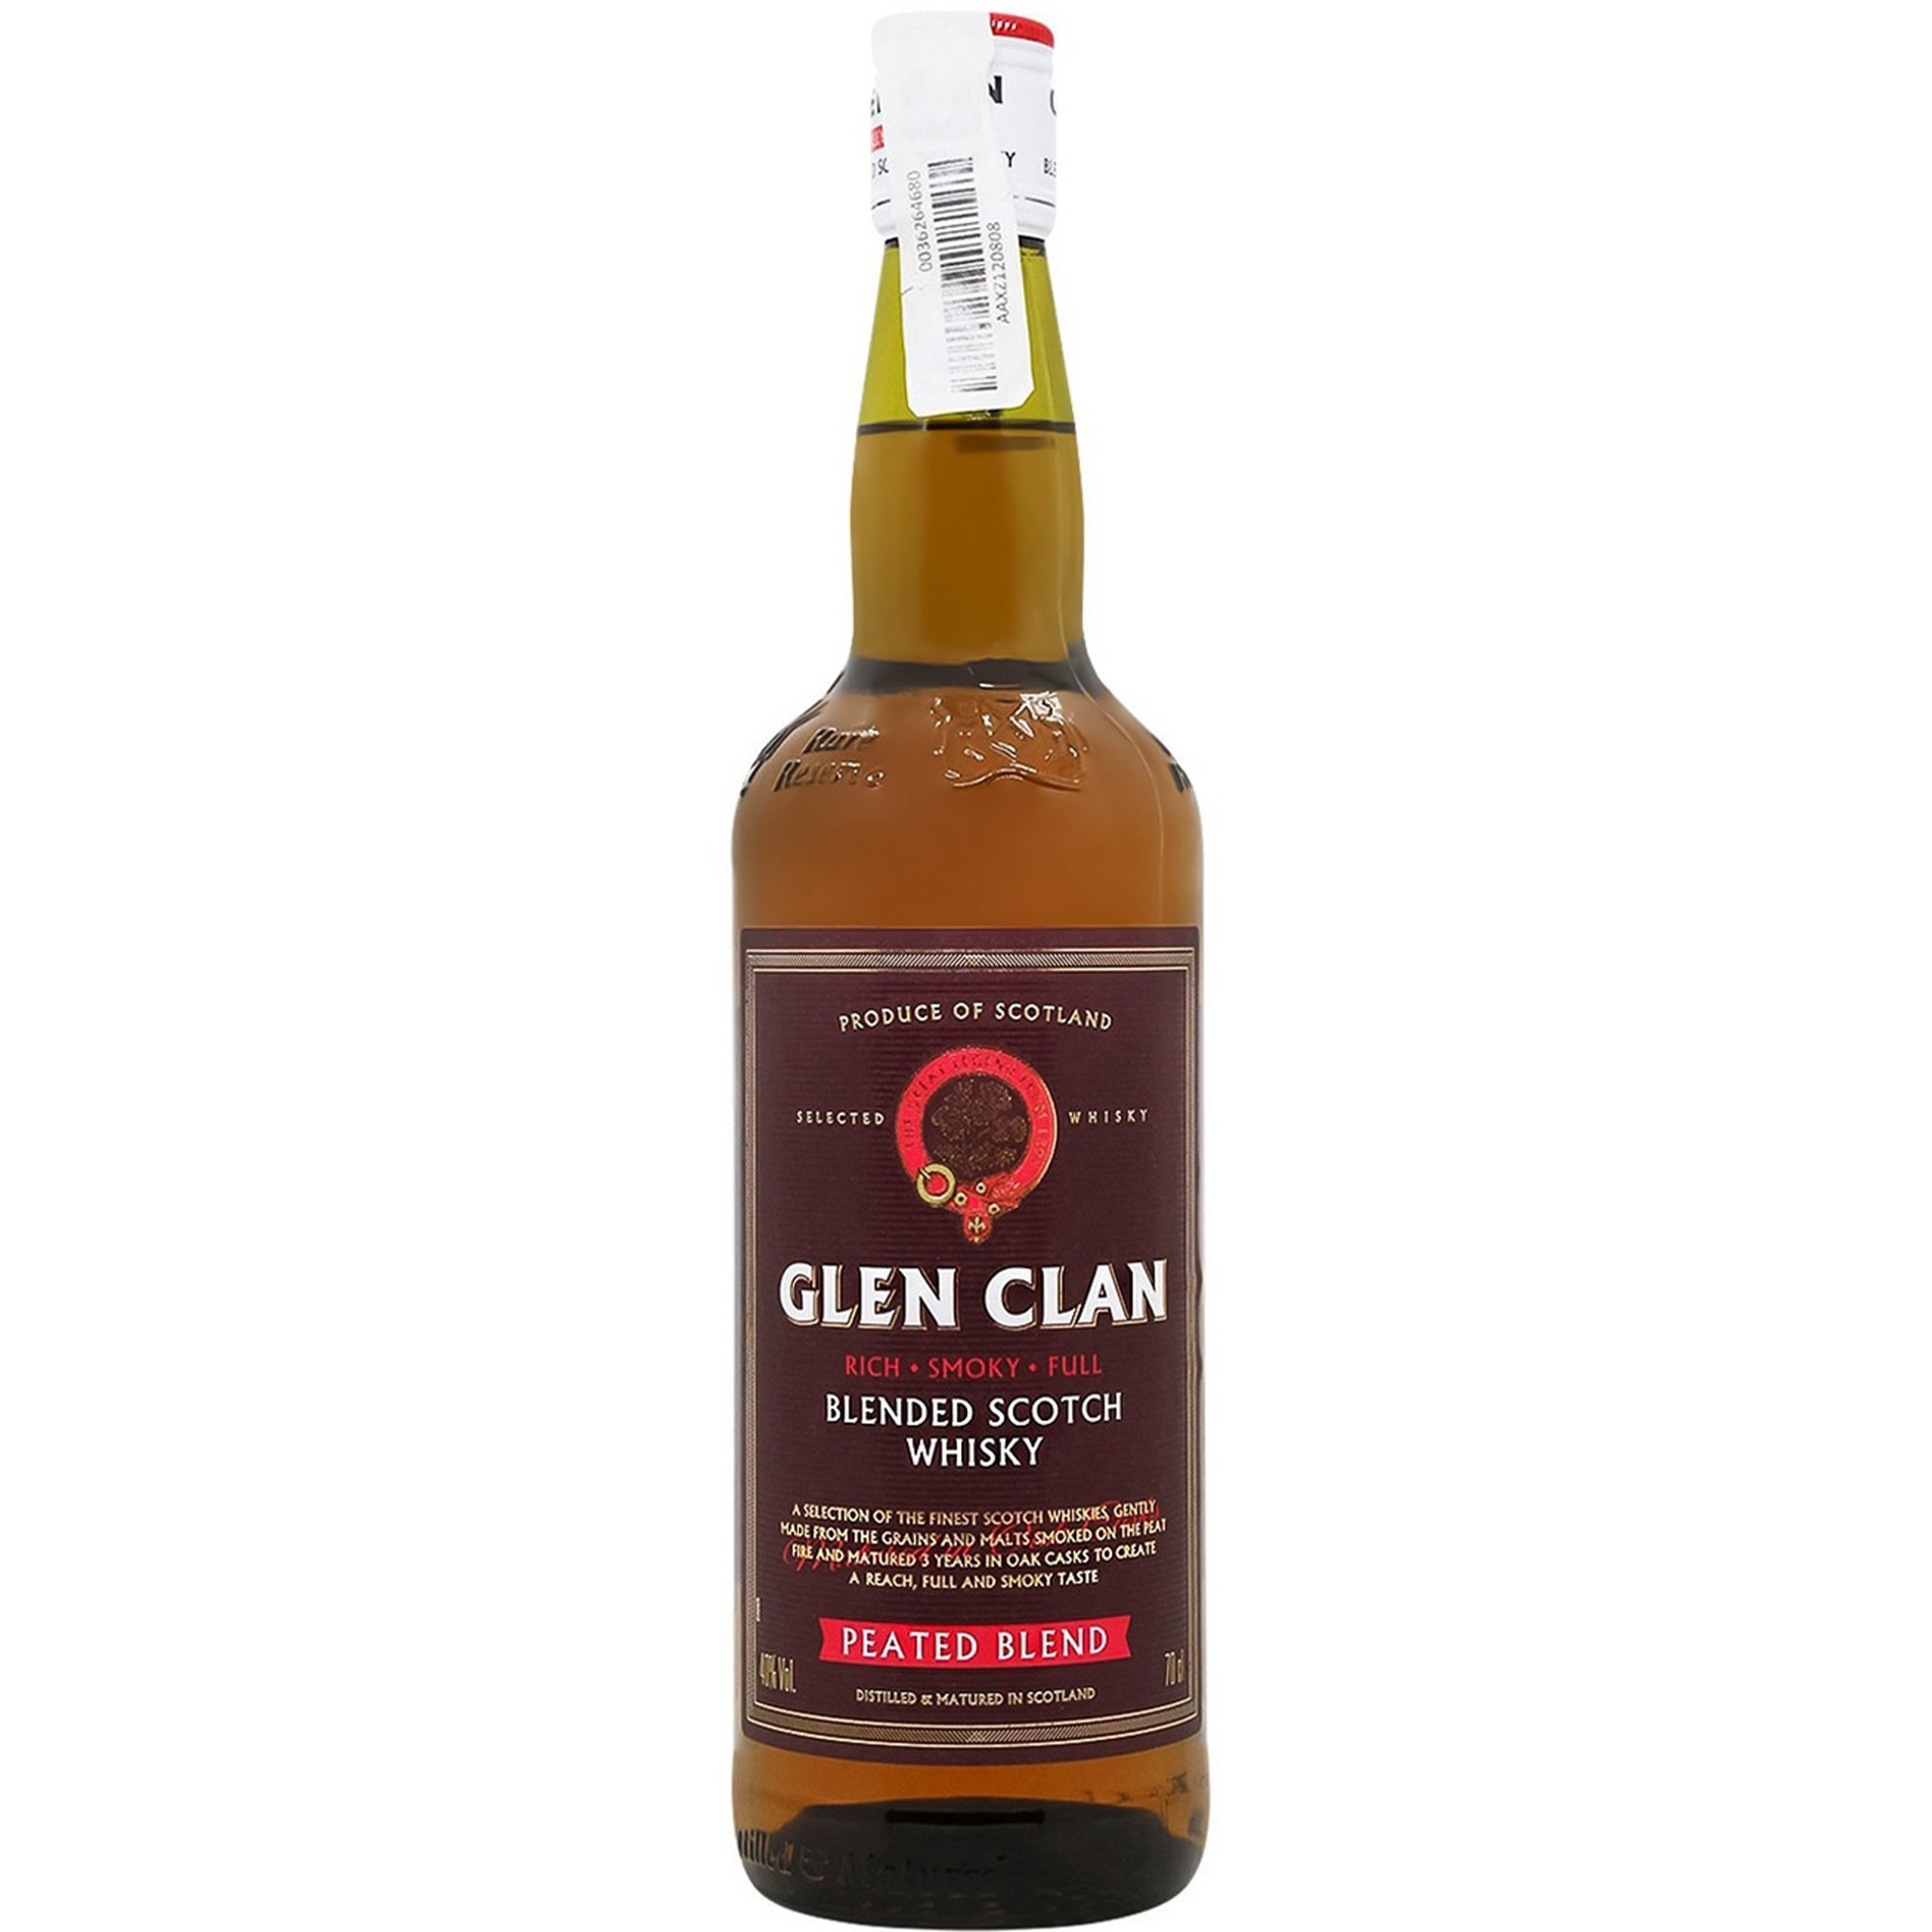 Виски Glen Clan Peated Blended Scotch Whisky 40% 0.7 л - фото 1